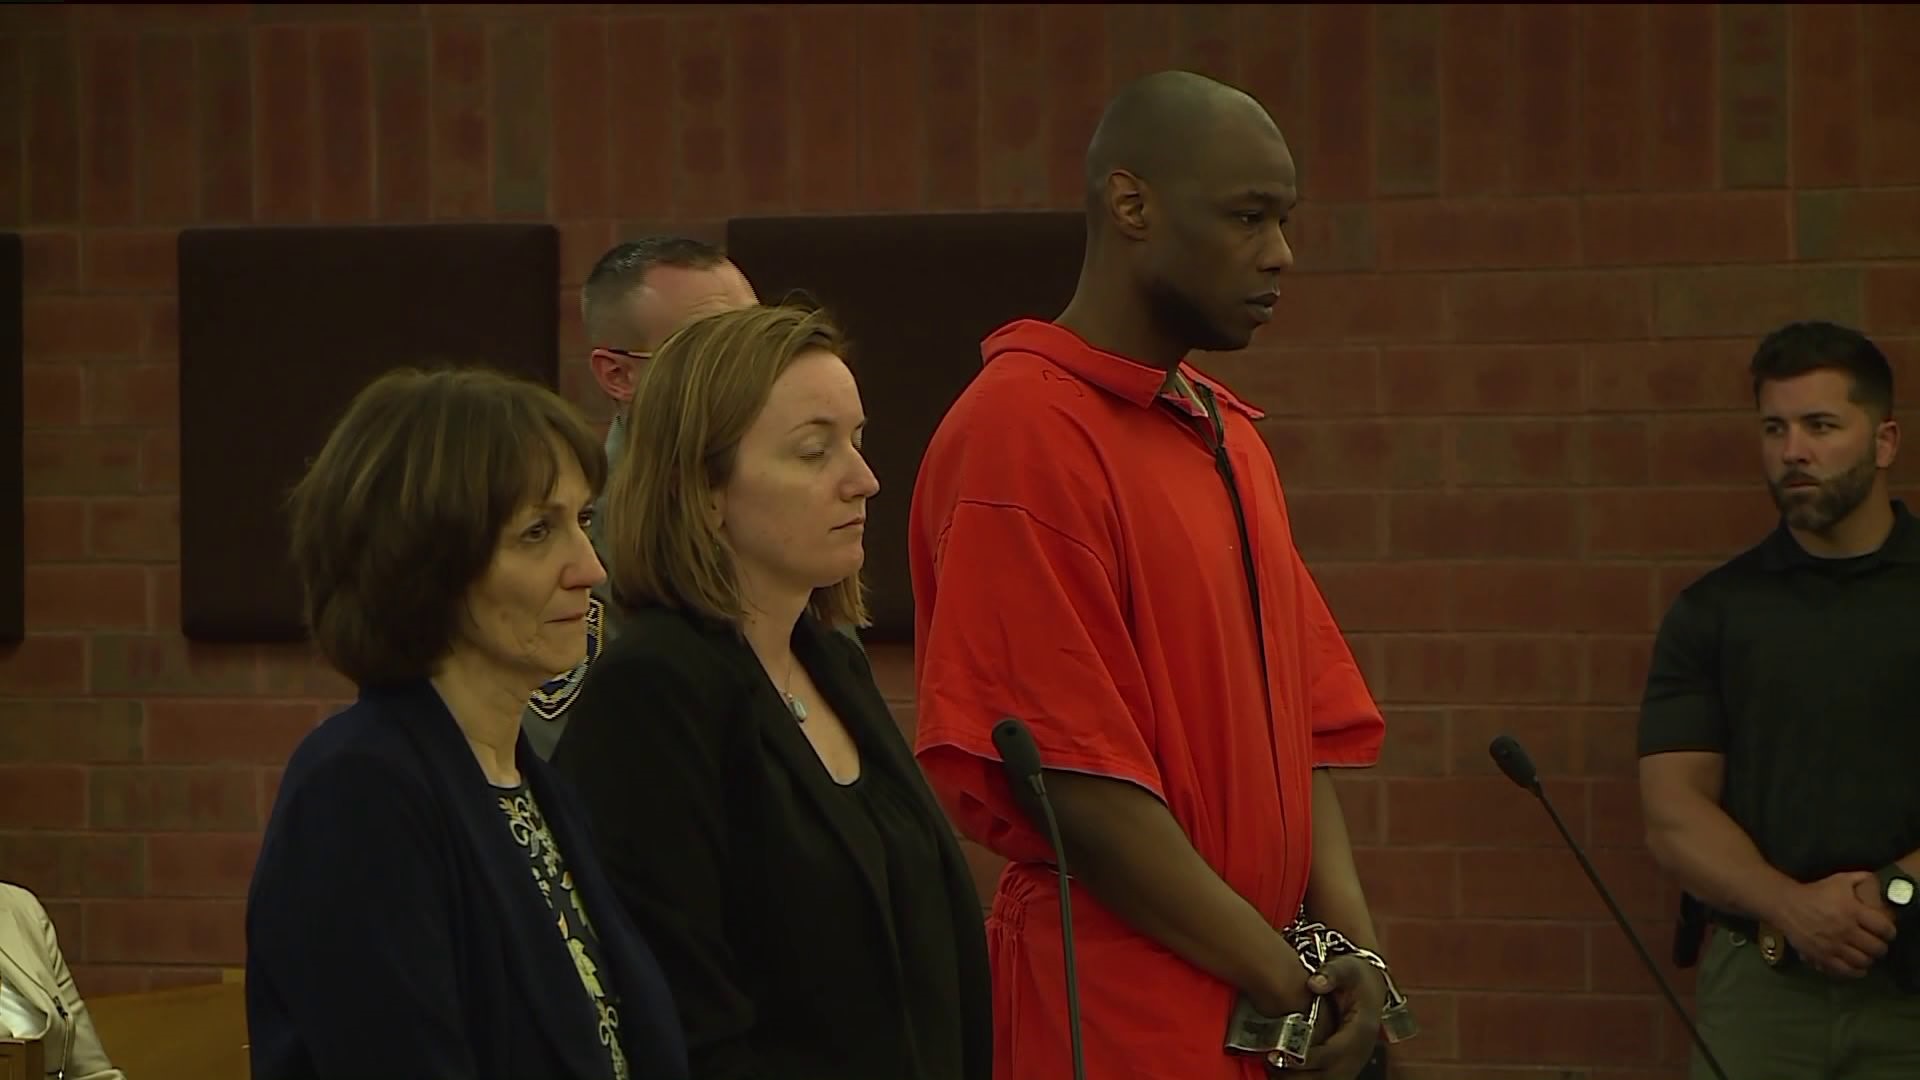 Ex-death row inmate sentenced to life for murder